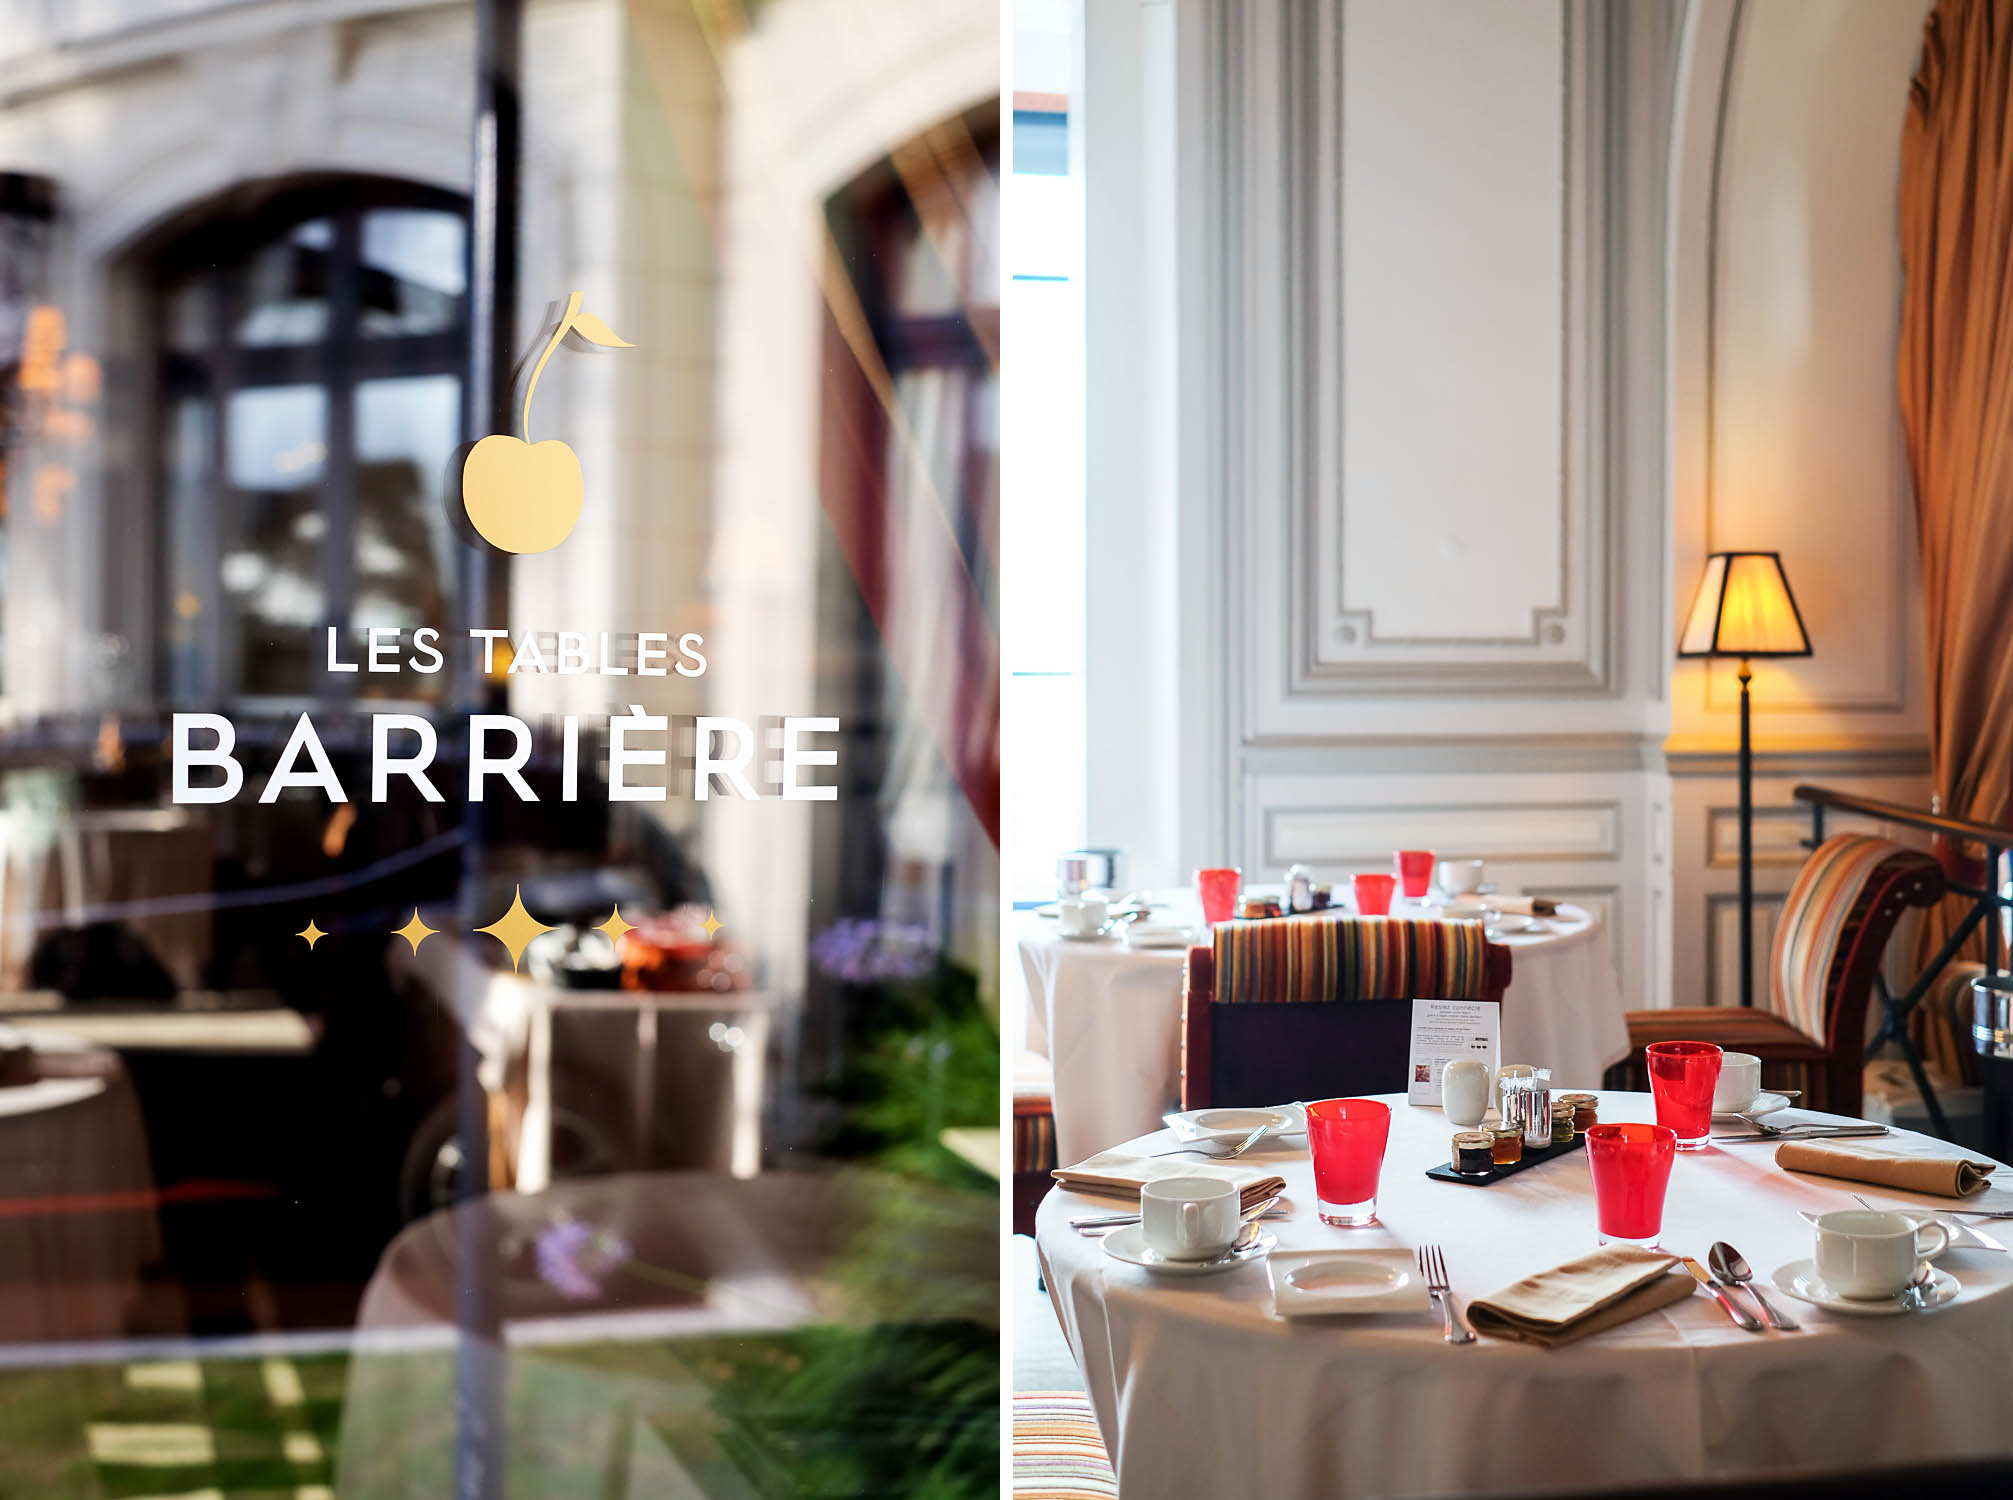 Le Grand Hotel Barriere, Dinard - Brittany, France